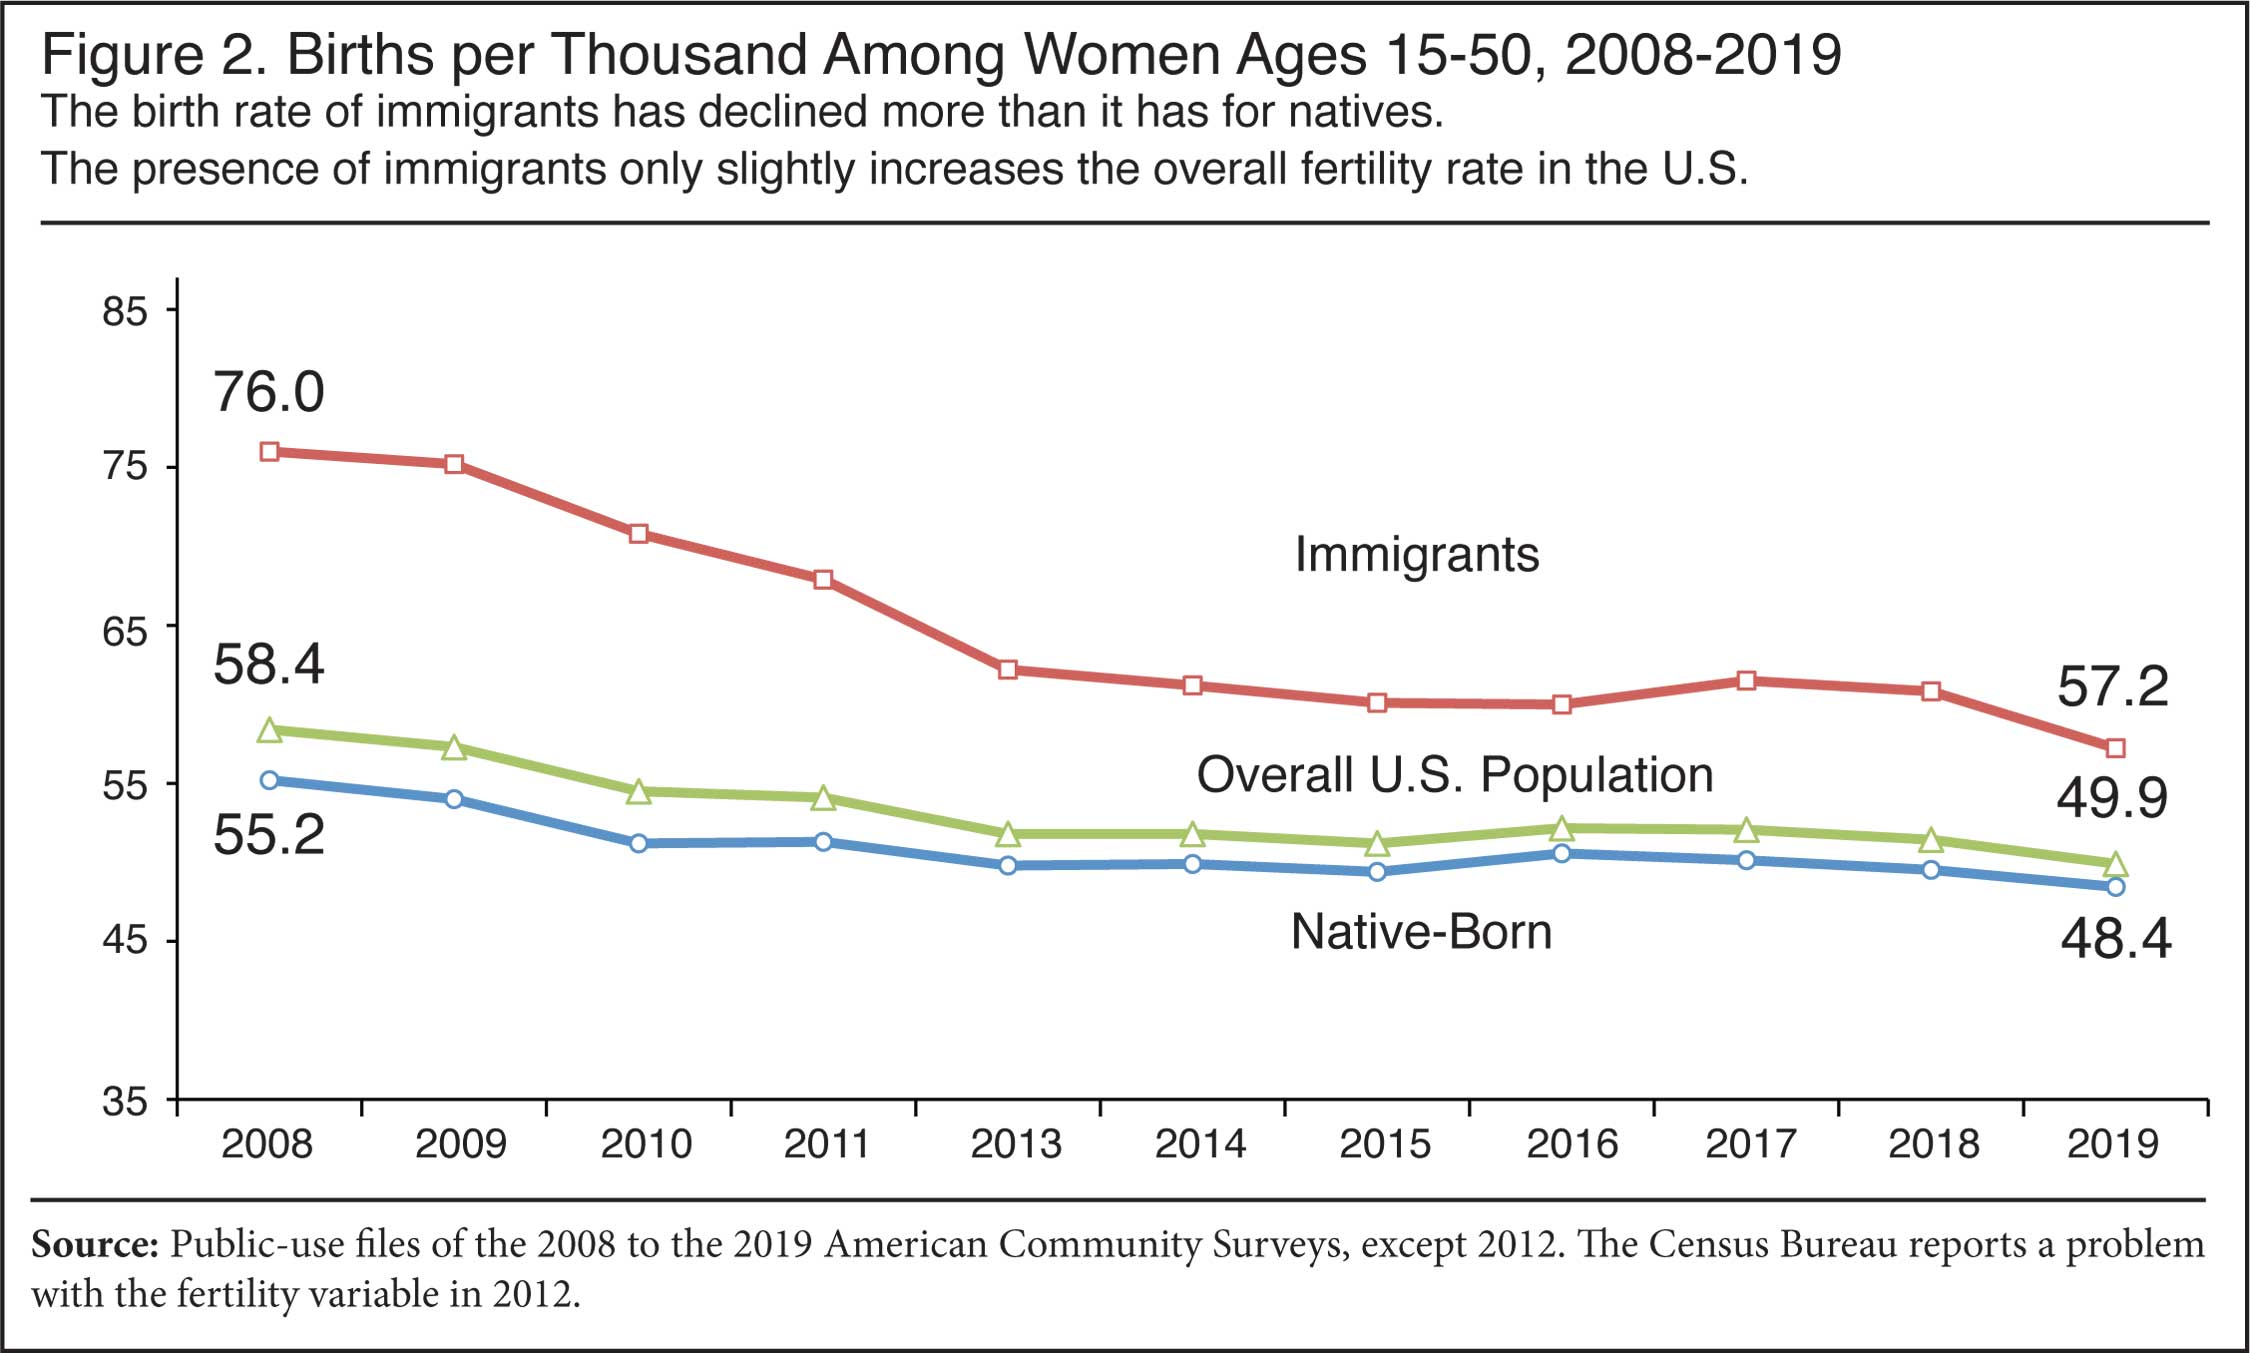 Graph: Births per Thousand Among Women Ages 15-50, 2008 to 2019